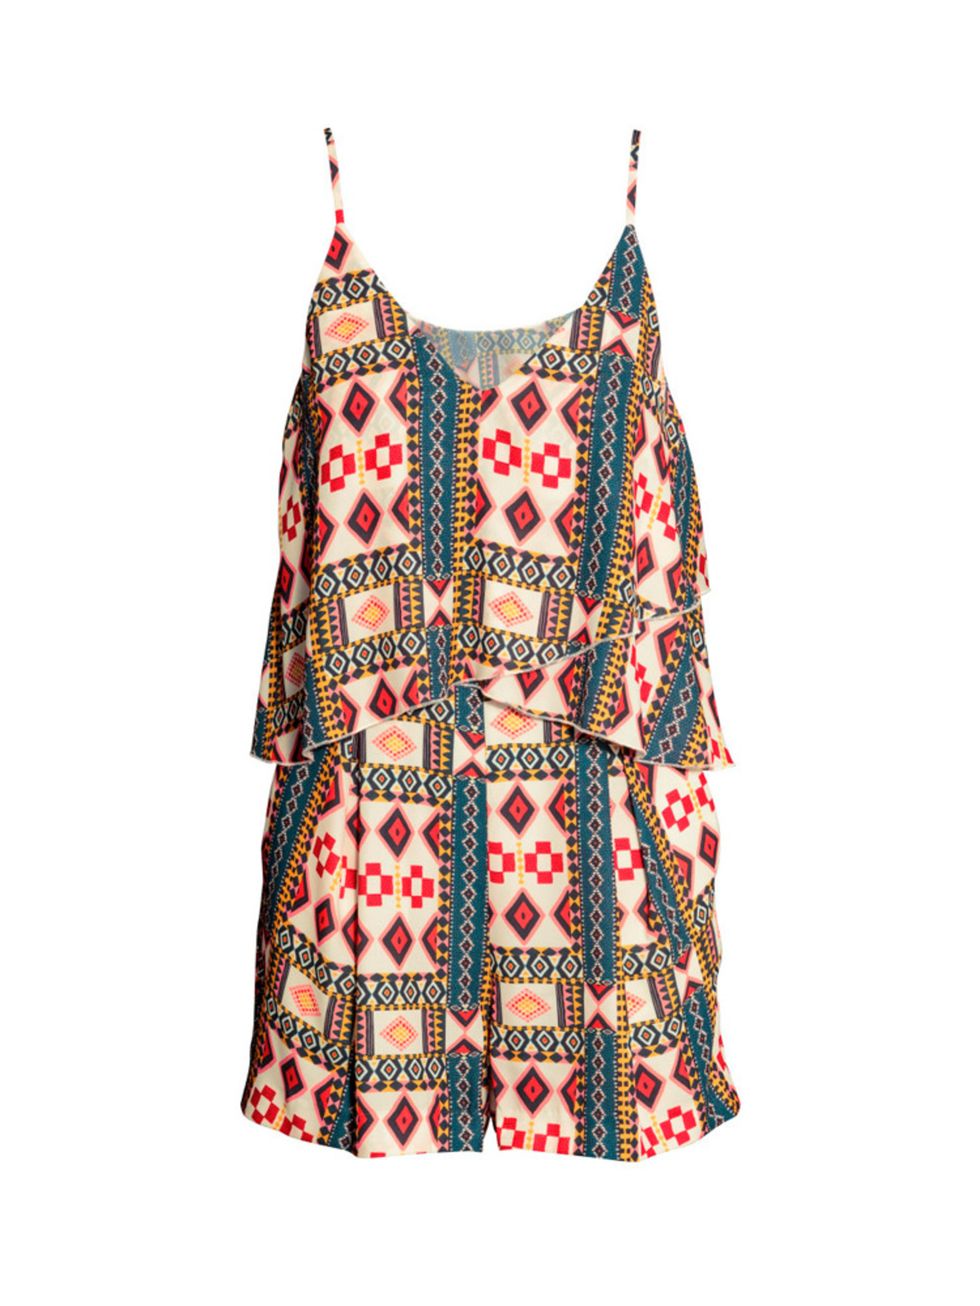 <p><a href="http://www.hm.com/gb/product/96215?article=96215-C" target="_blank">H&M</a> Playsuit, £24.99</p>